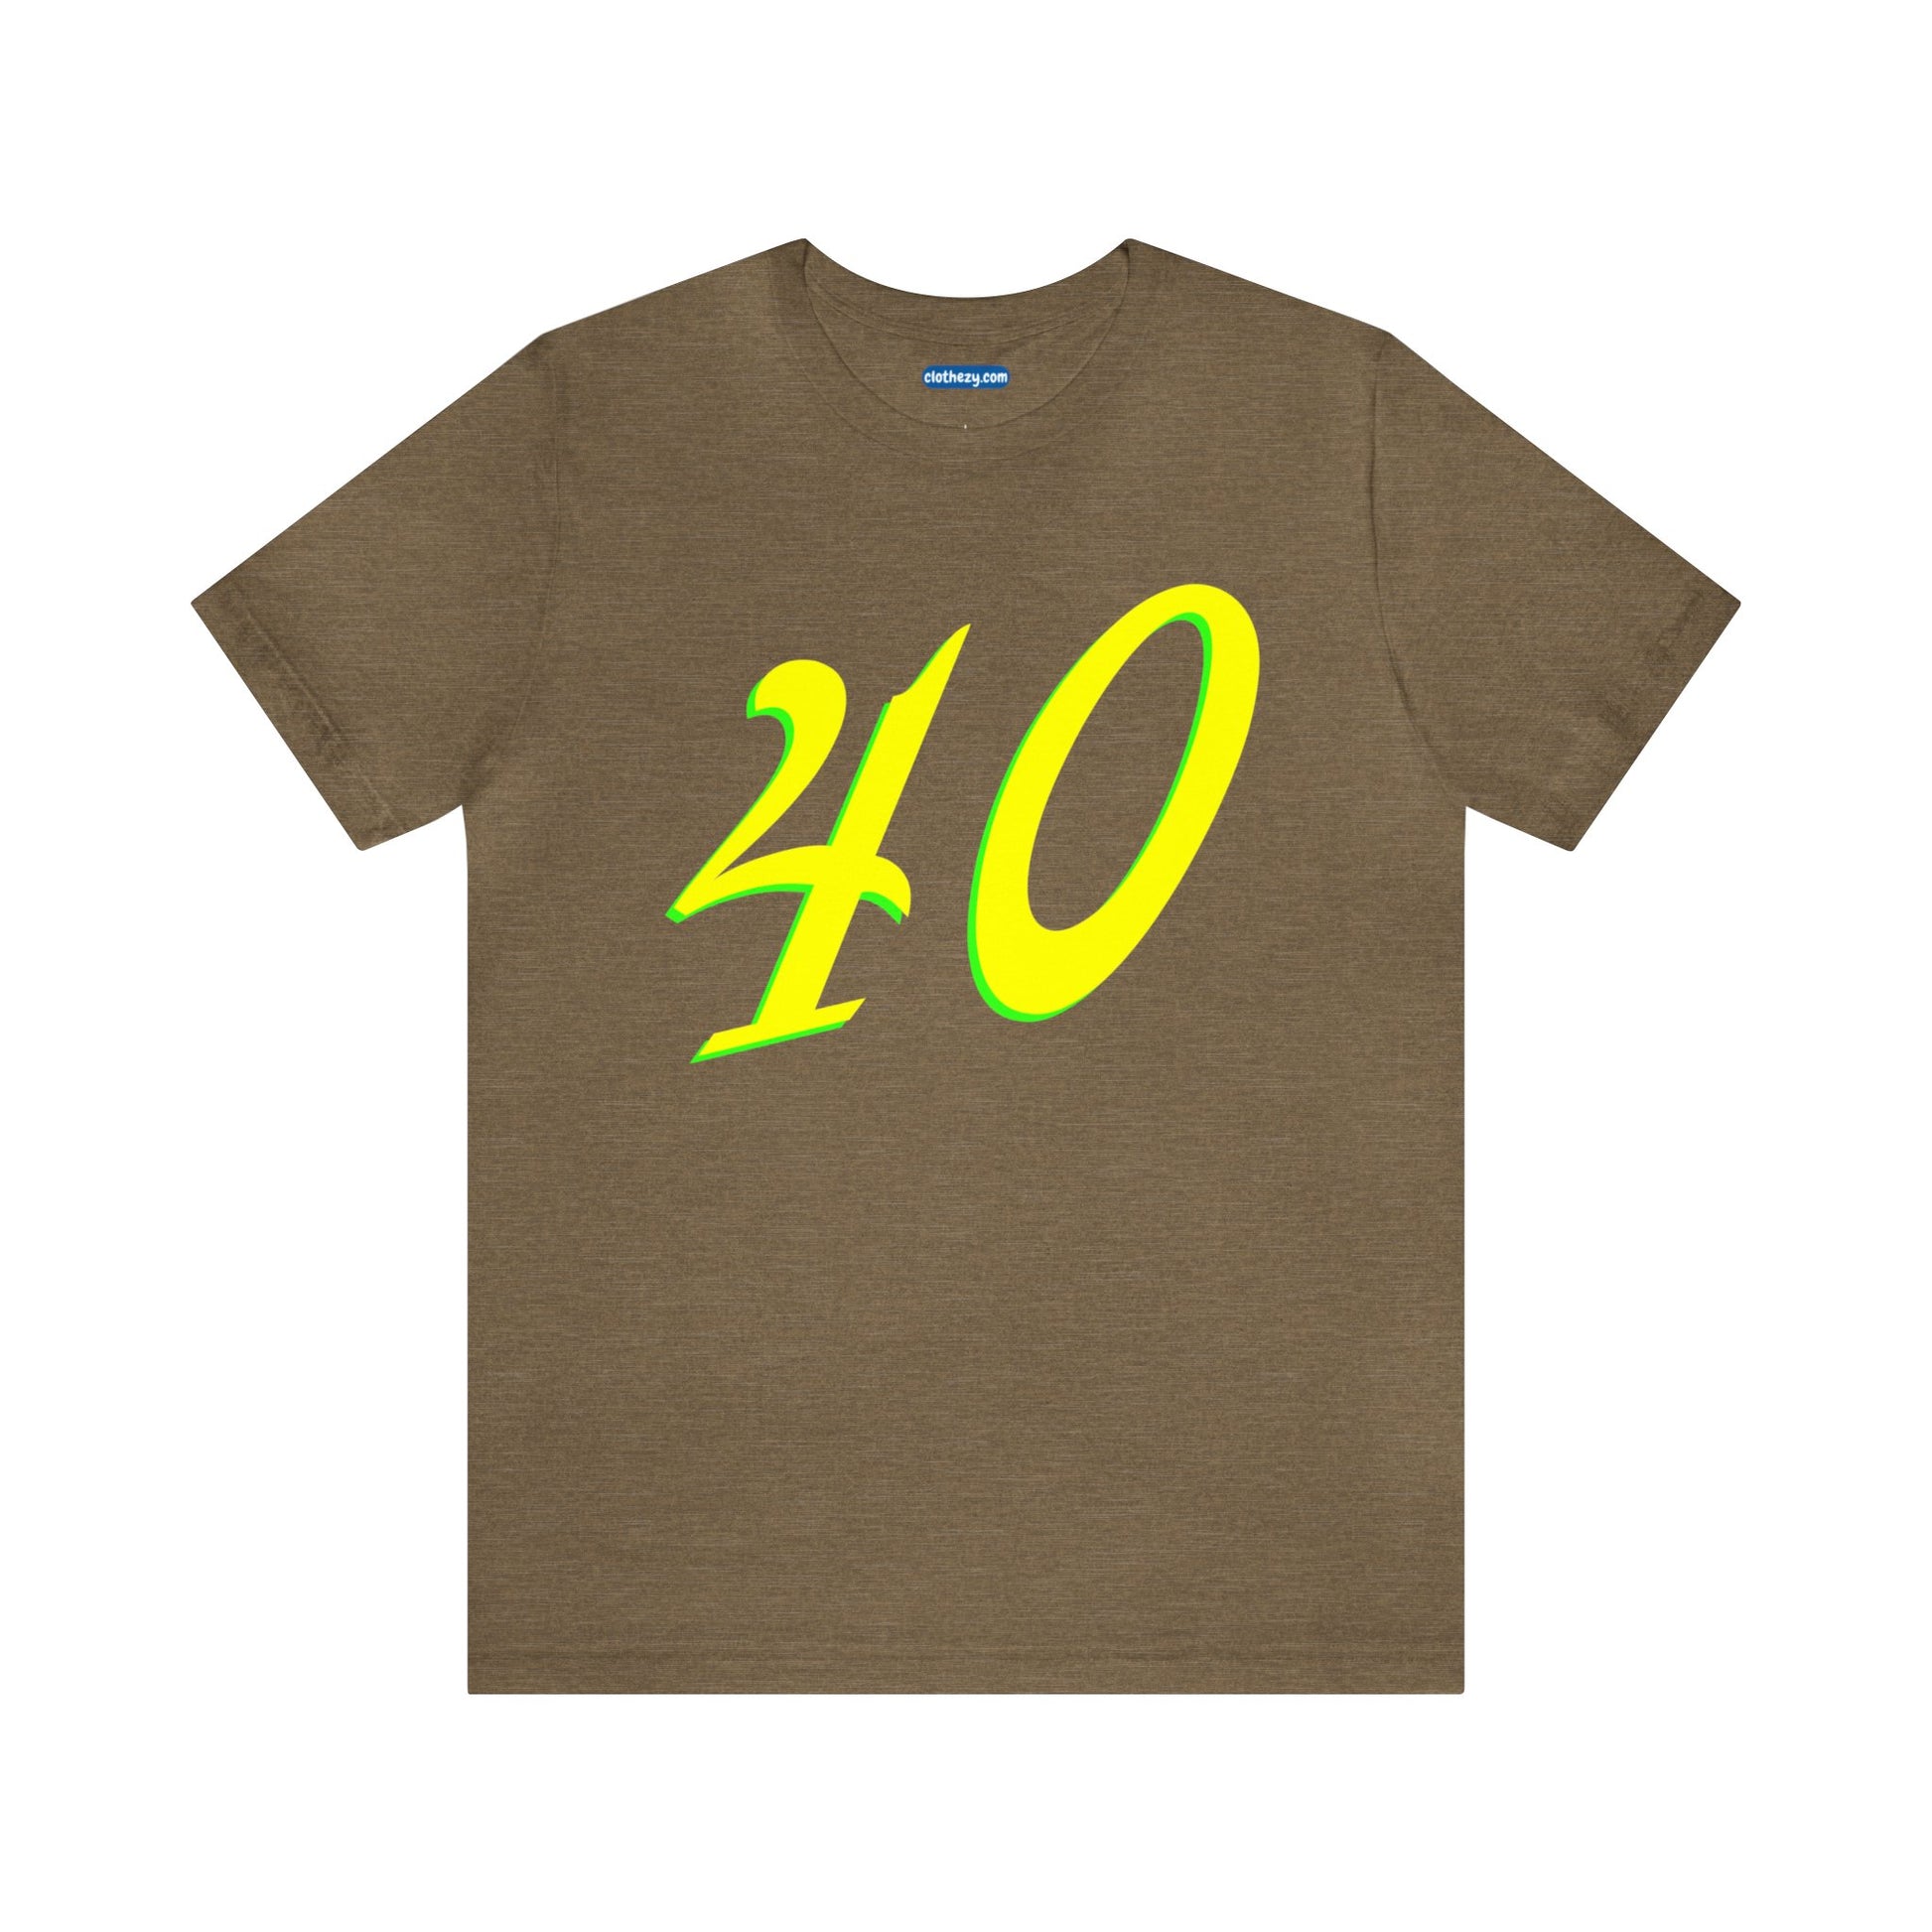 Number 40 Design - Soft Cotton Tee for birthdays and celebrations, Gift for friends and family, Multiple Options by clothezy.com in Olive Heather Size Small - Buy Now